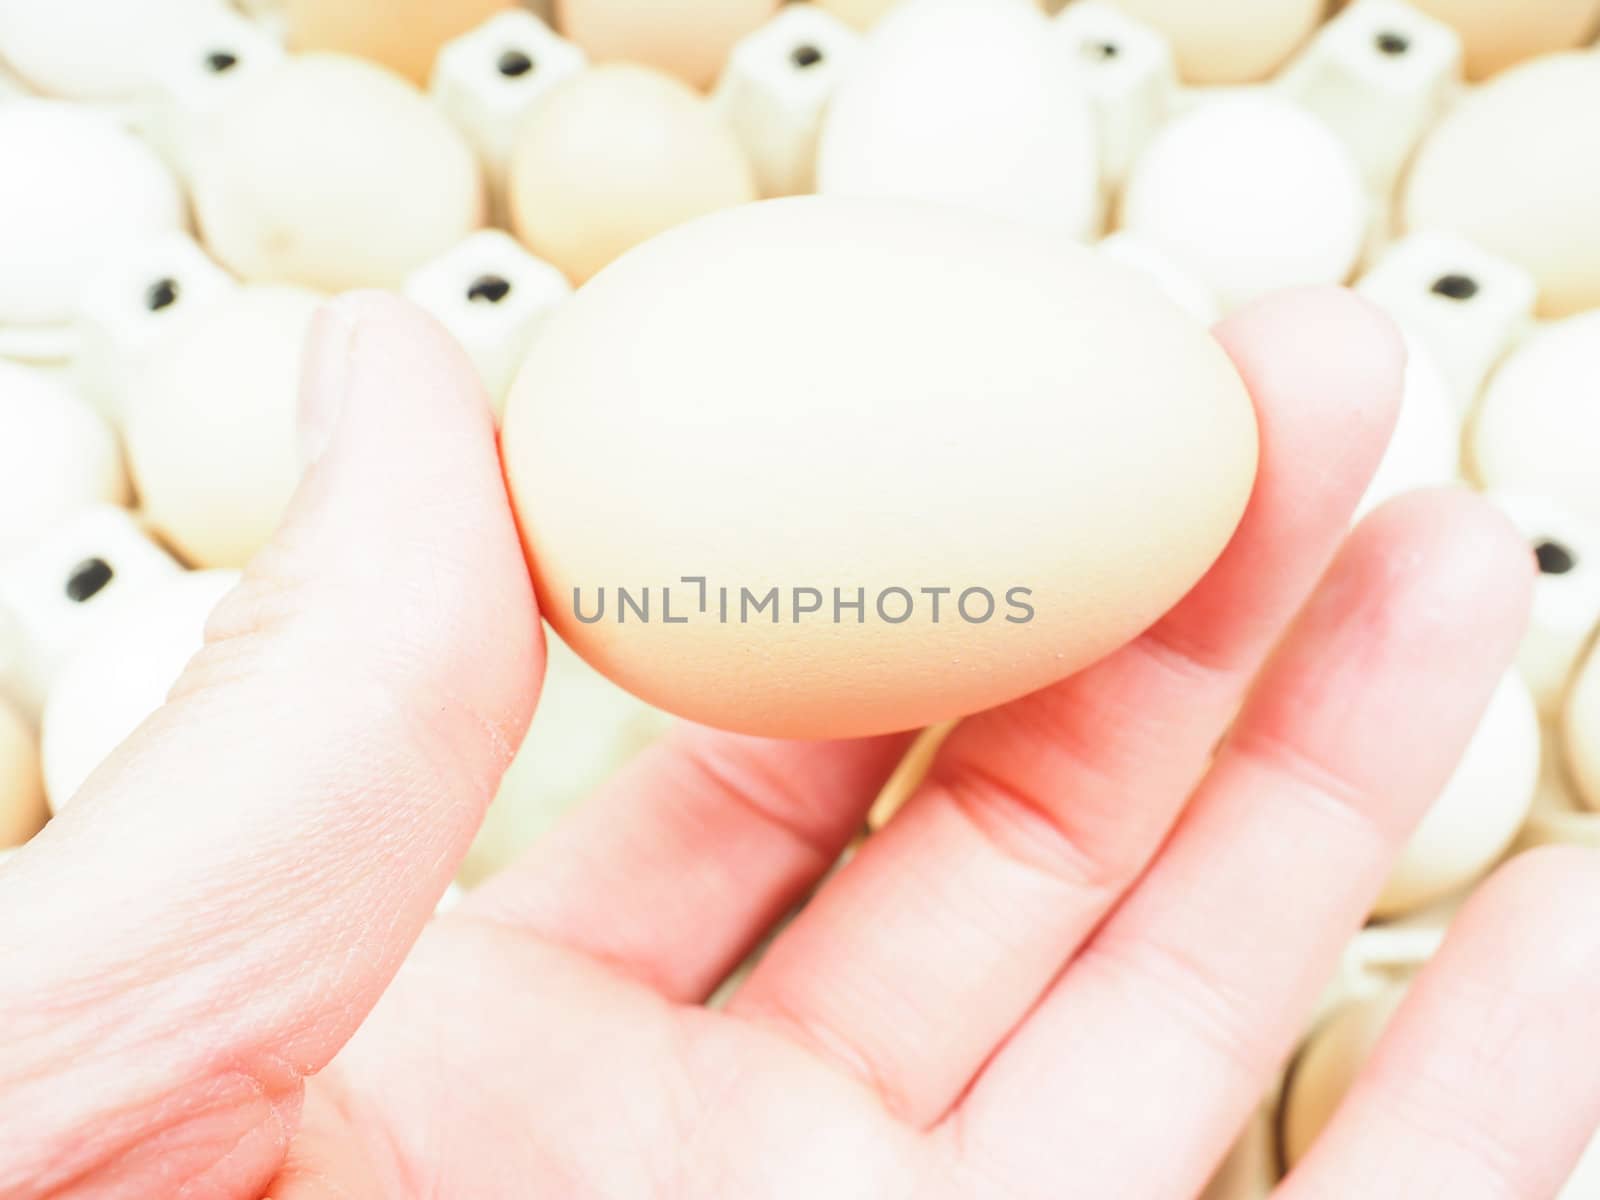 Someone holding a chicken egg over a container of brown and whit by Arvebettum